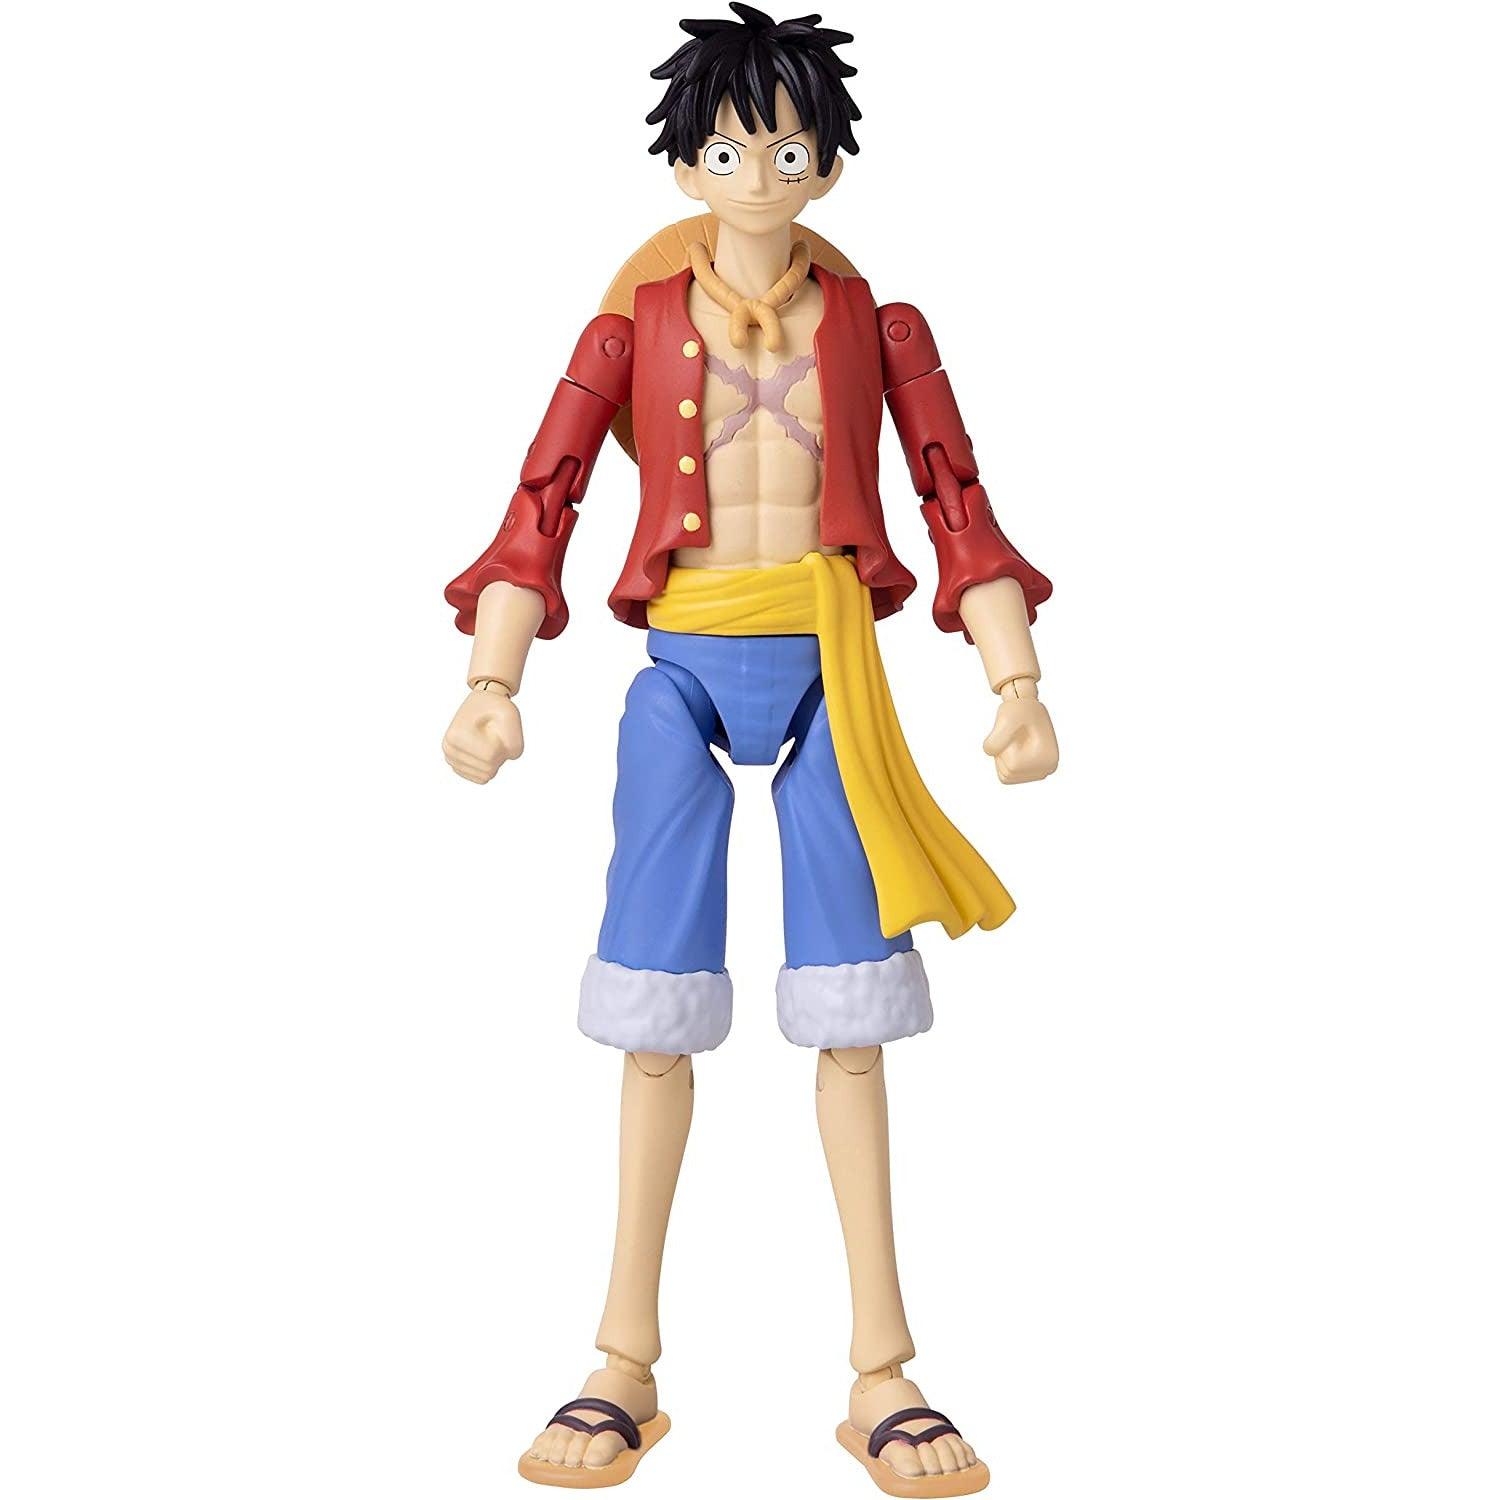 ANIME HEROES Bandai America One Piece, Monkey D. Luffy - BumbleToys - 6+ Years, 6-8 years, Action Figures, Bandai America, Boys, Characters, Figures, OXE, Pre-Order